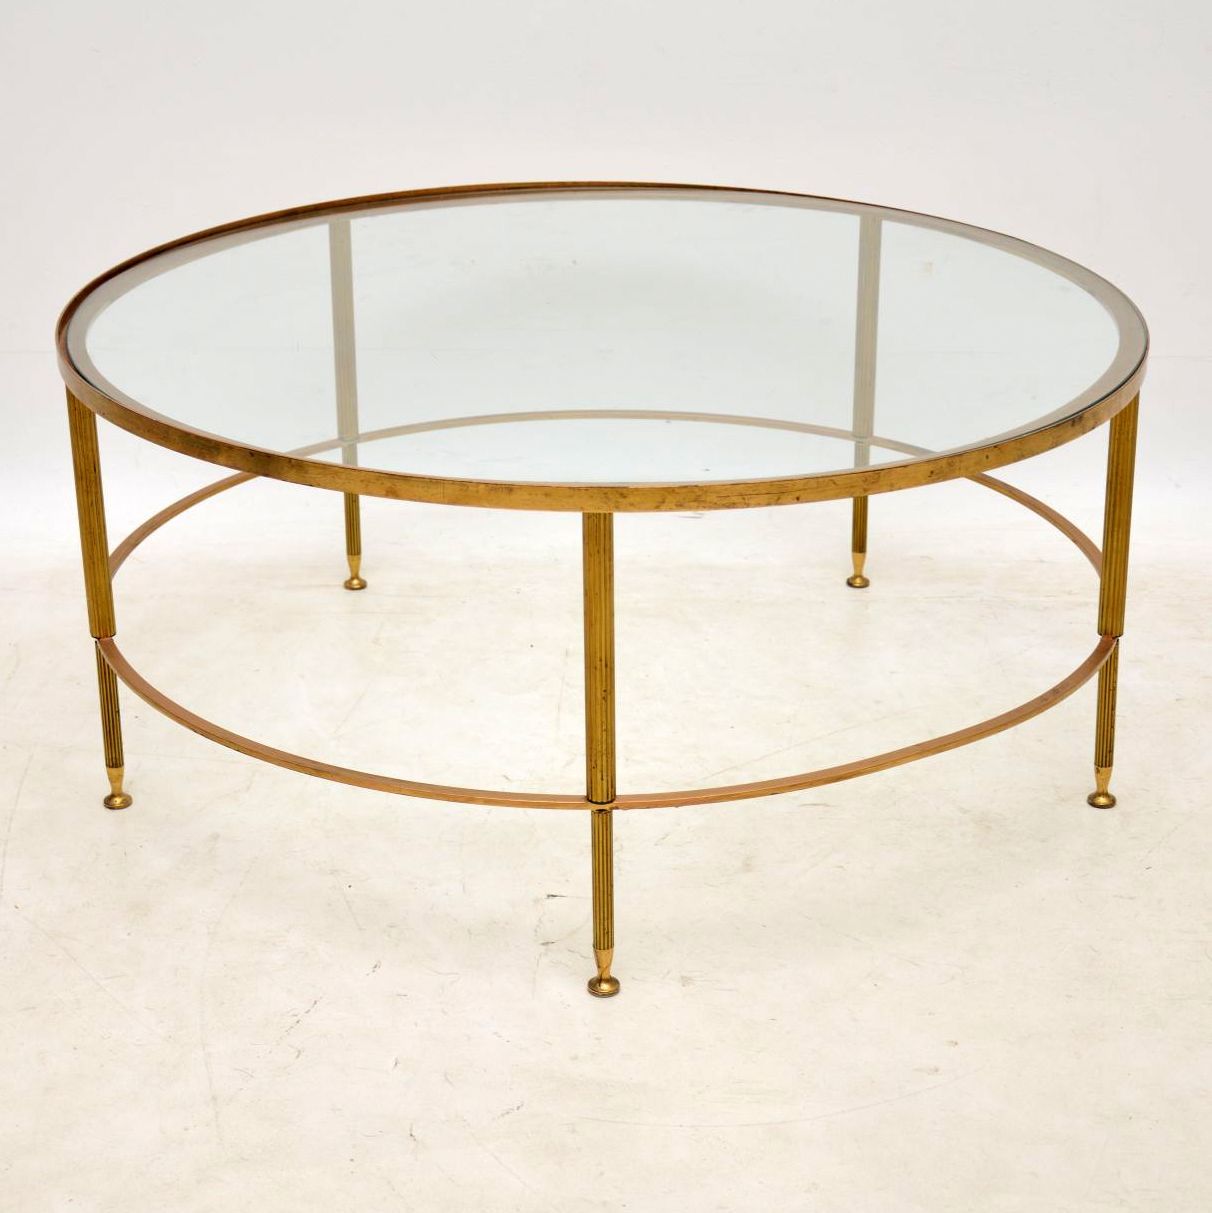 1960's French Brass & Glass Coffee Table | Interior Intended For Antique Brass Aluminum Round Coffee Tables (View 8 of 15)